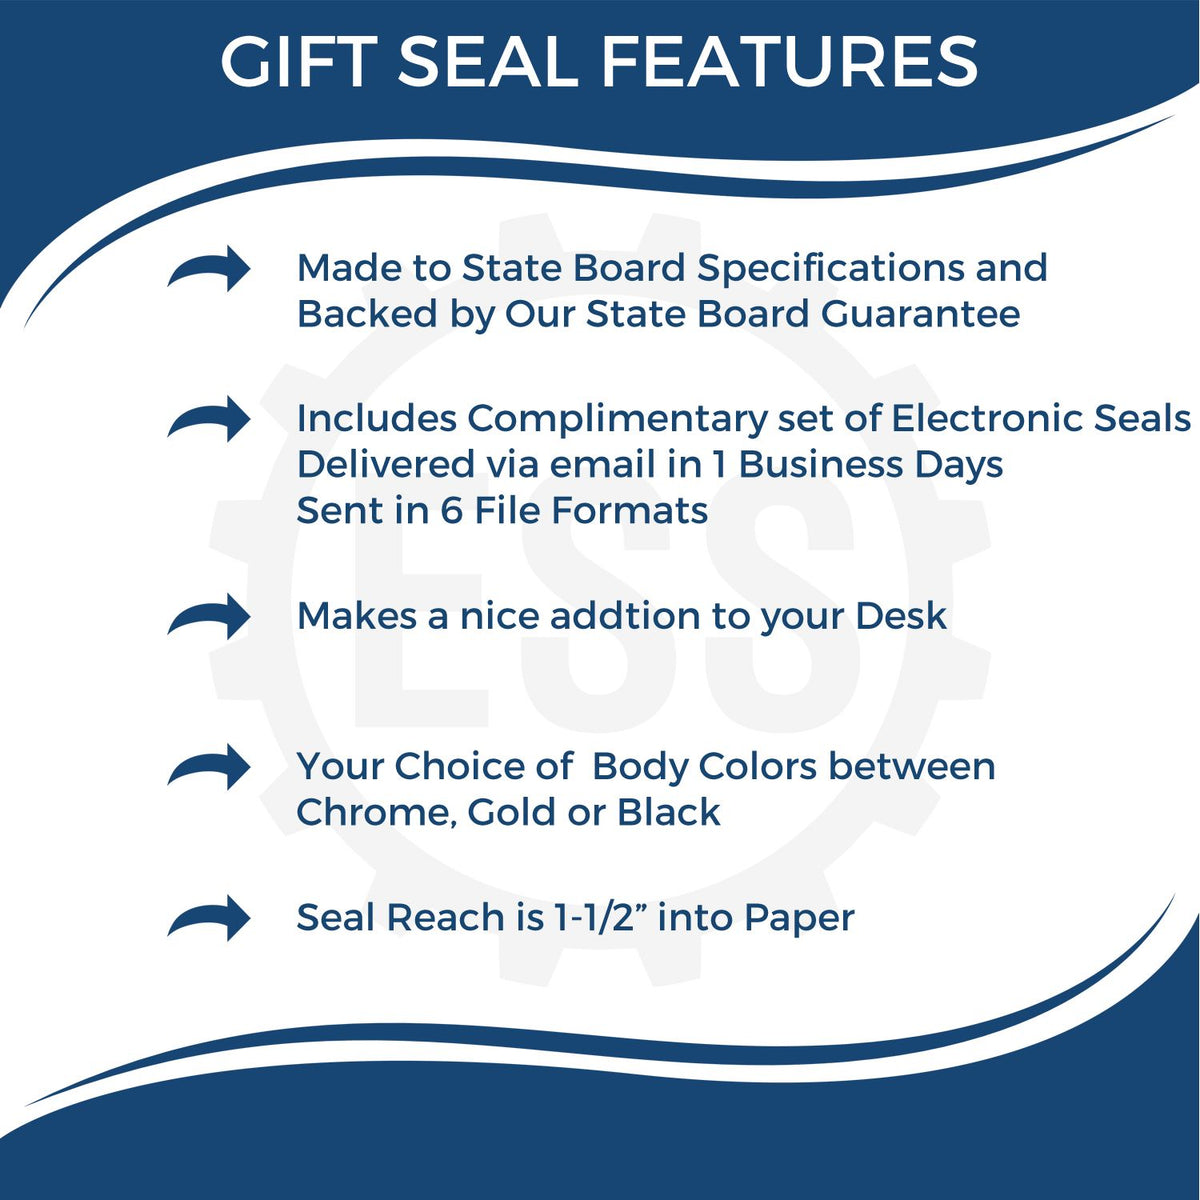 A picture of an infographic highlighting the selling points for the Gift Maryland Engineer Seal